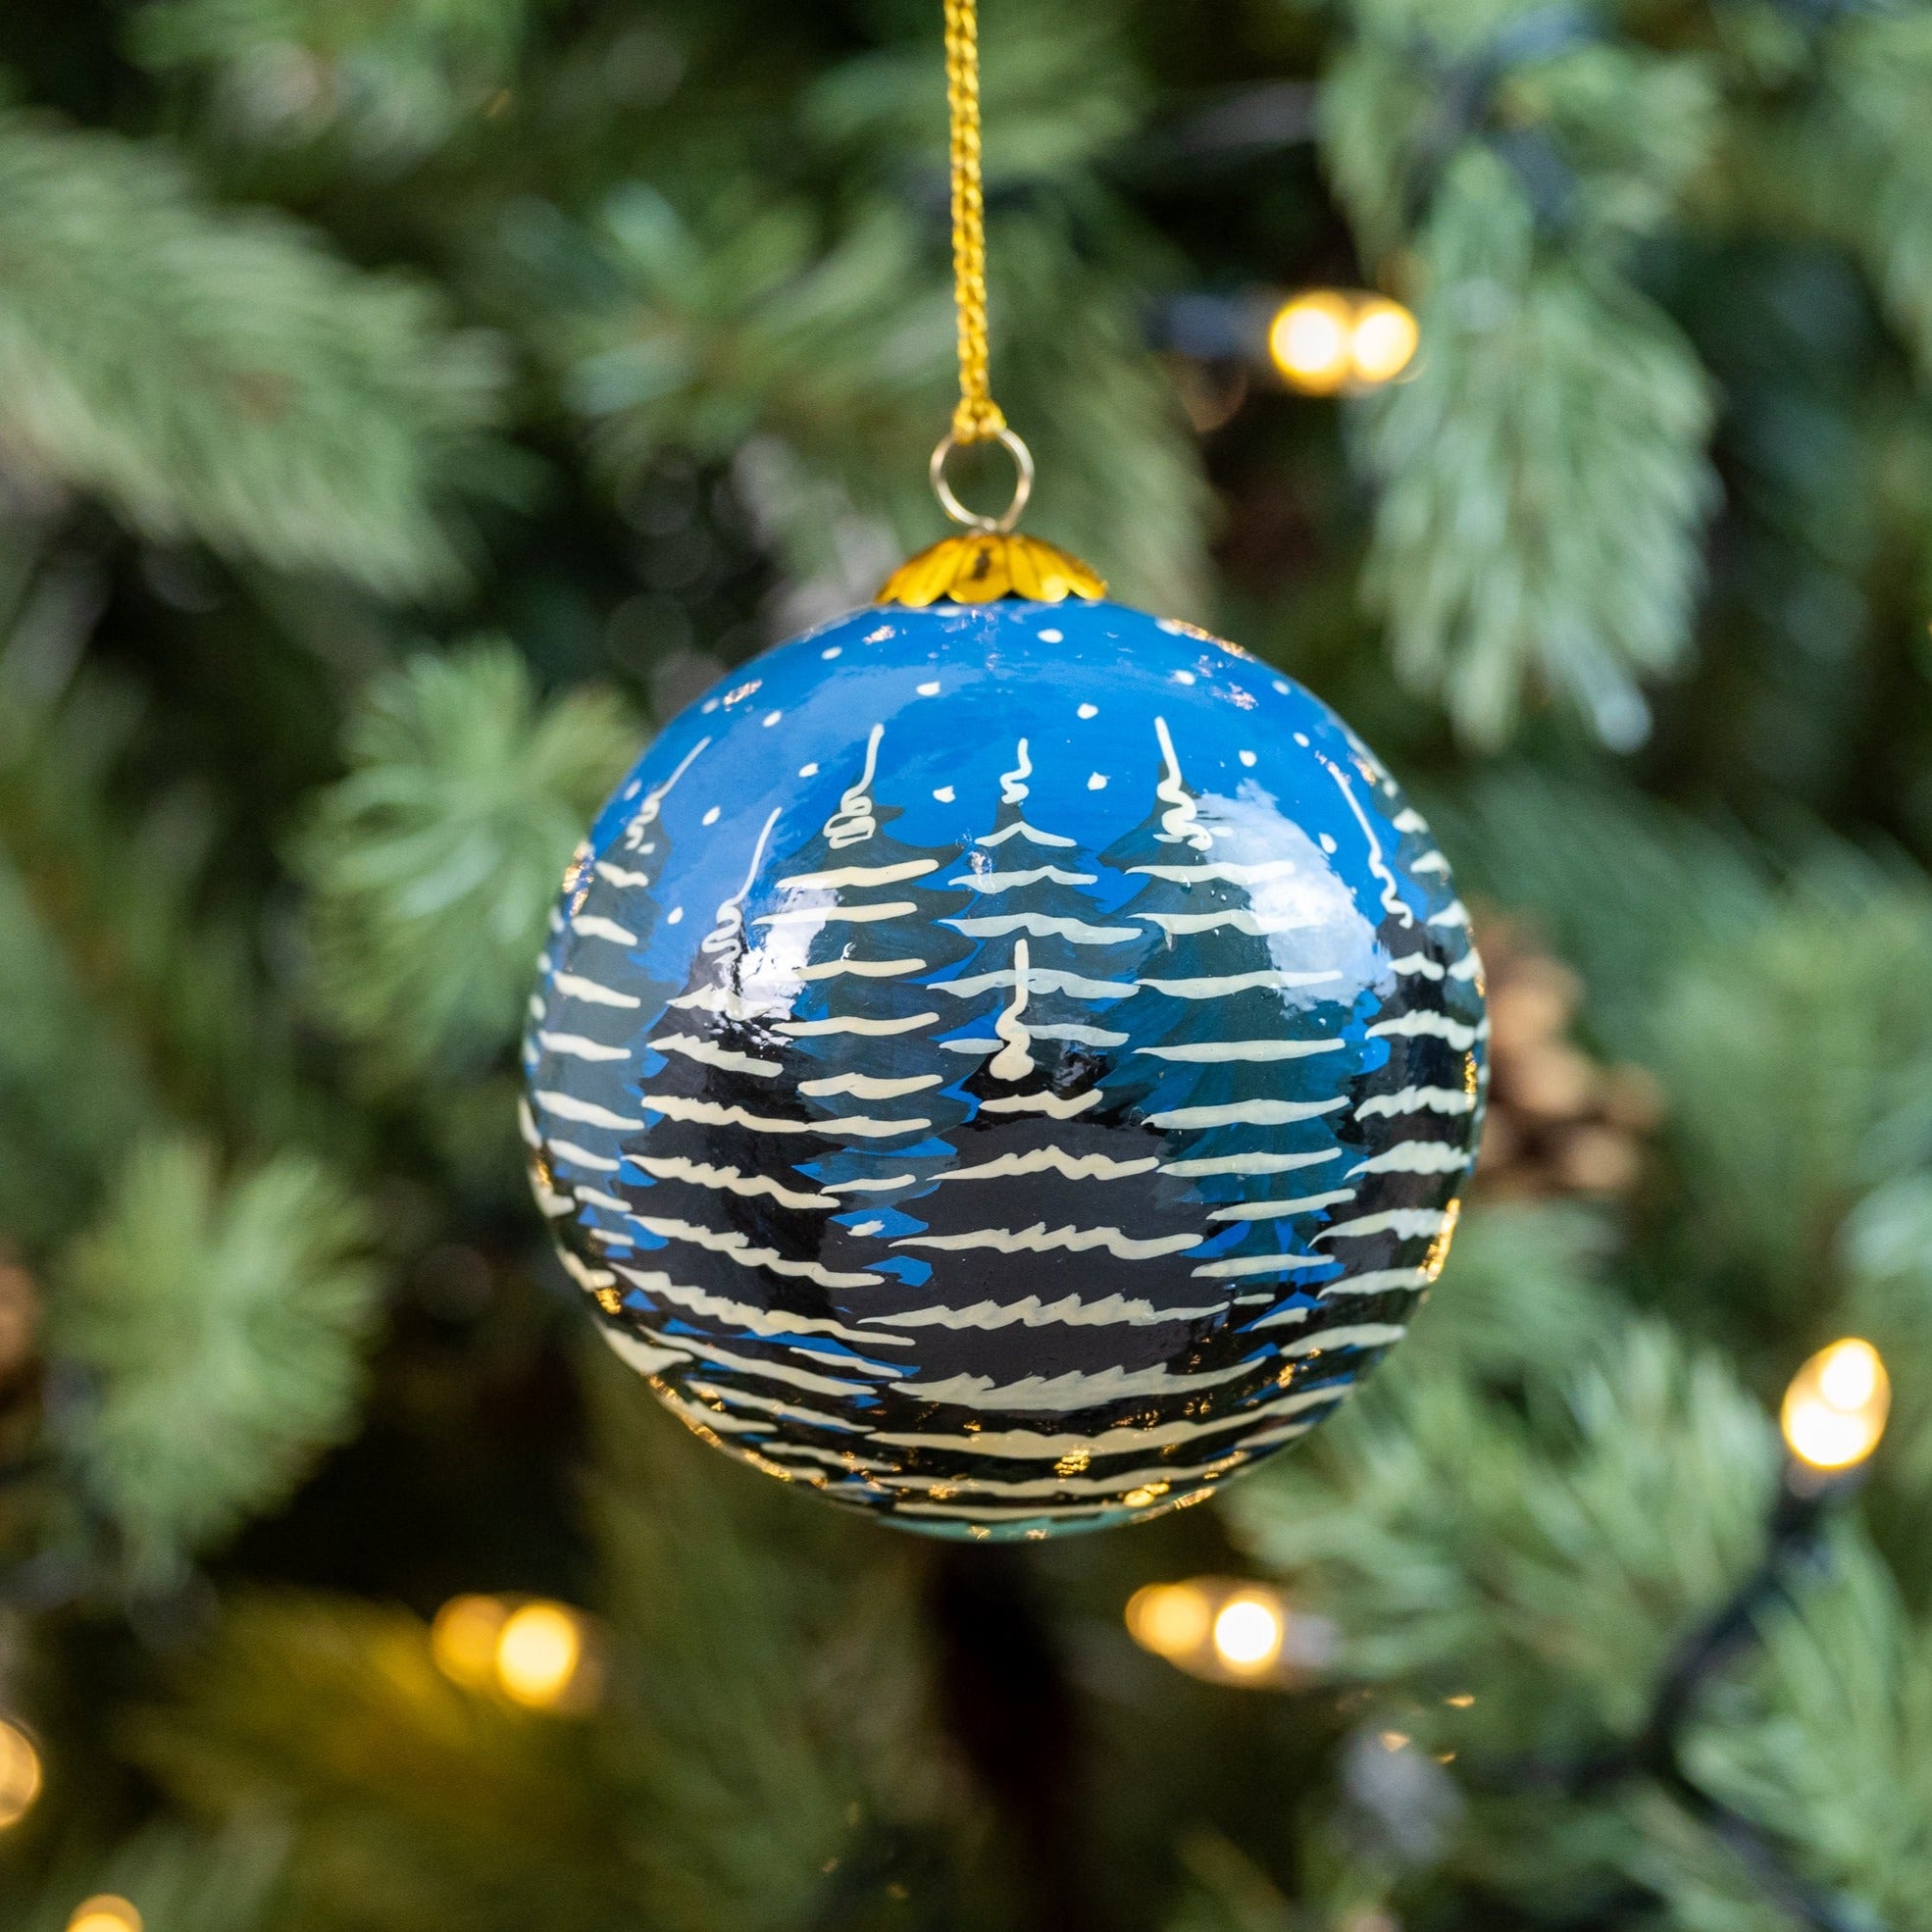 Winter Trees Hand Painted Christmas Bauble | British Red Cross Shop